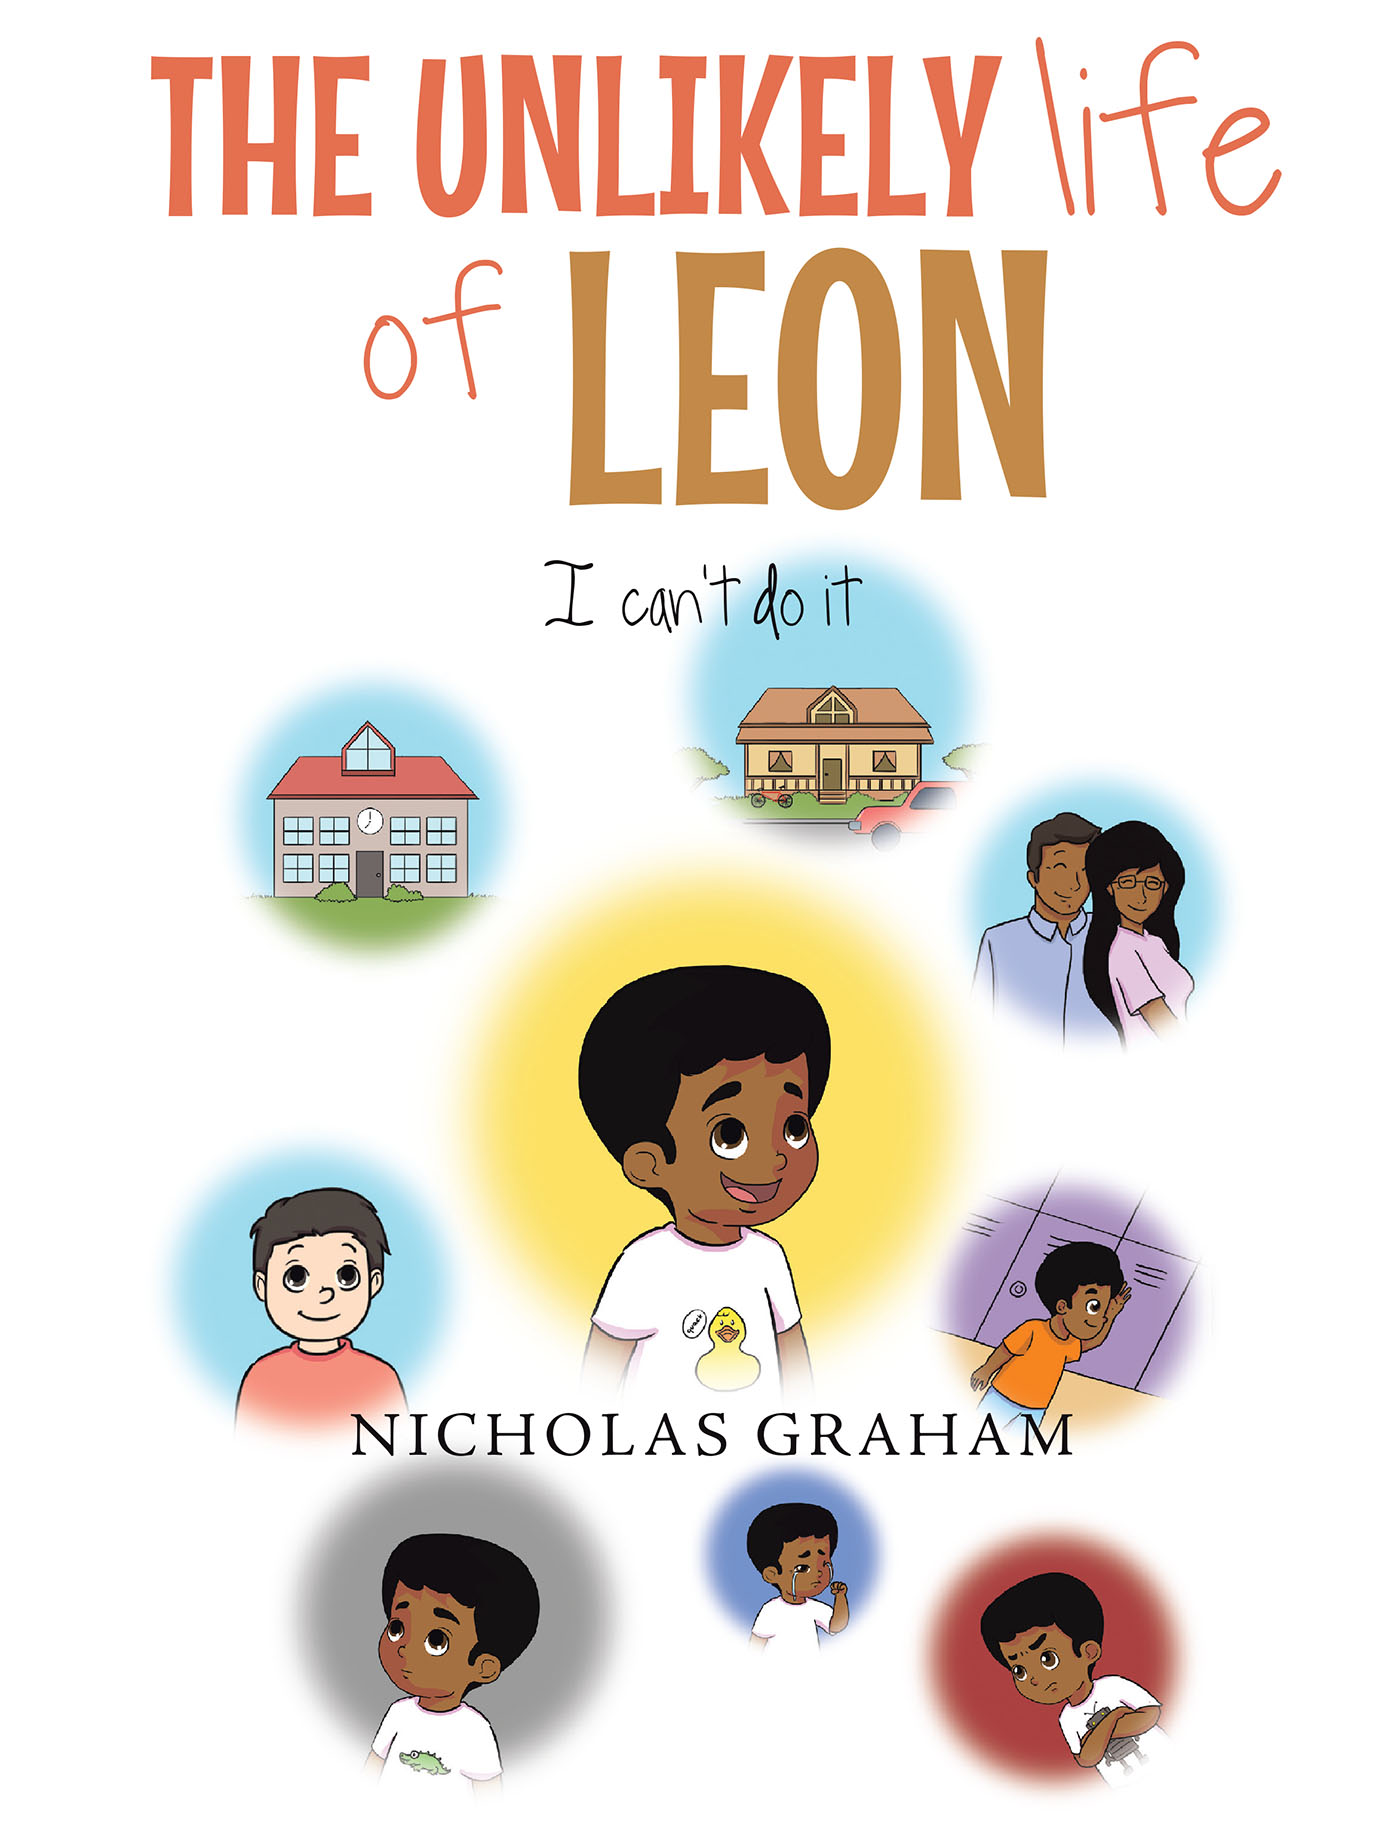 The Unlikely Life of Leon Cover Image